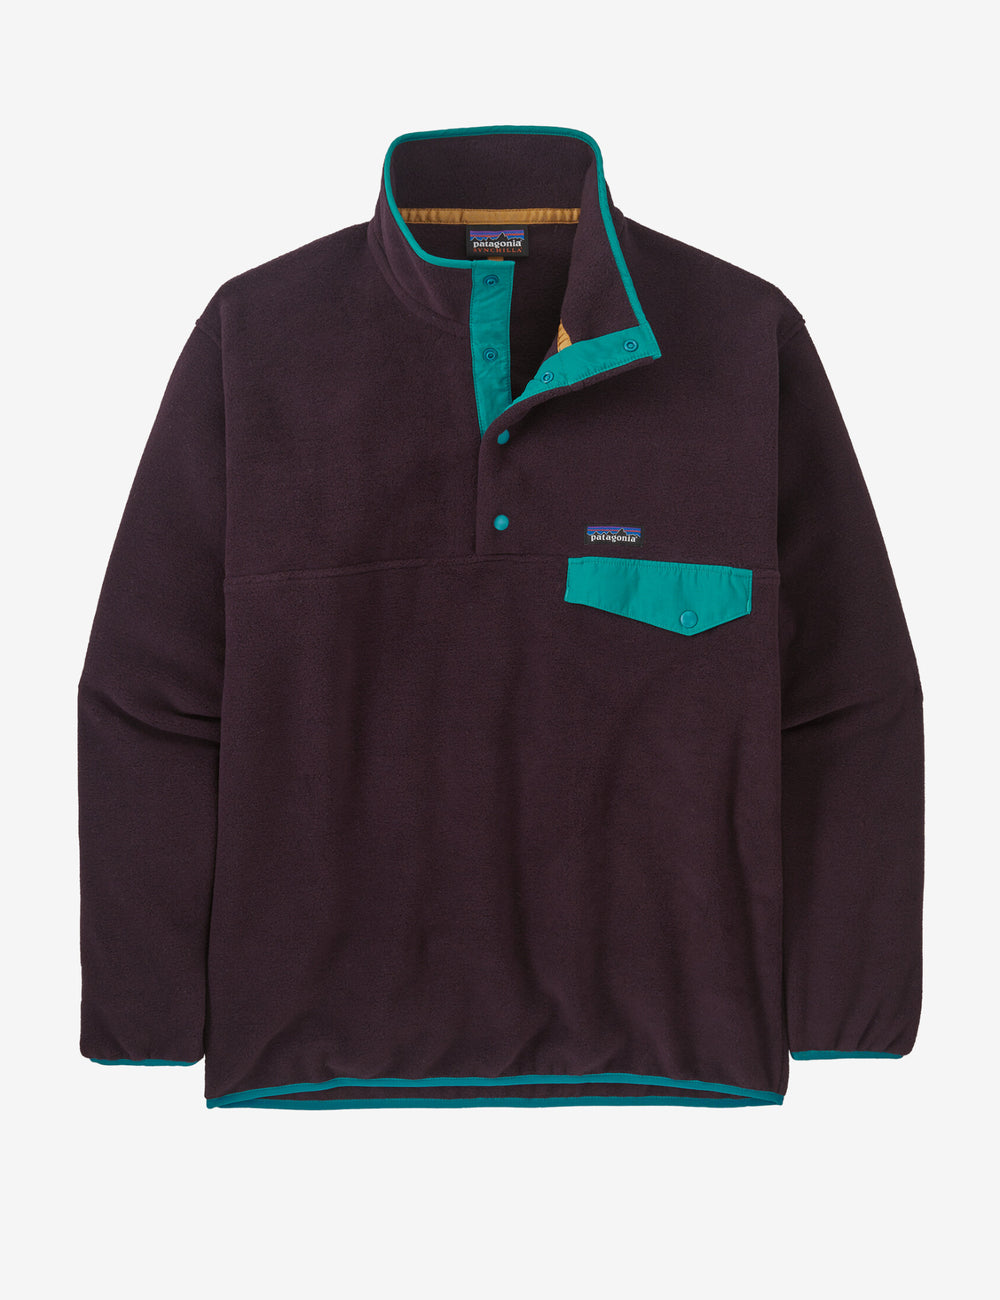 Patagonia Synchilla Snap-T Pullover - Obsidian Plum | Urban Excess 